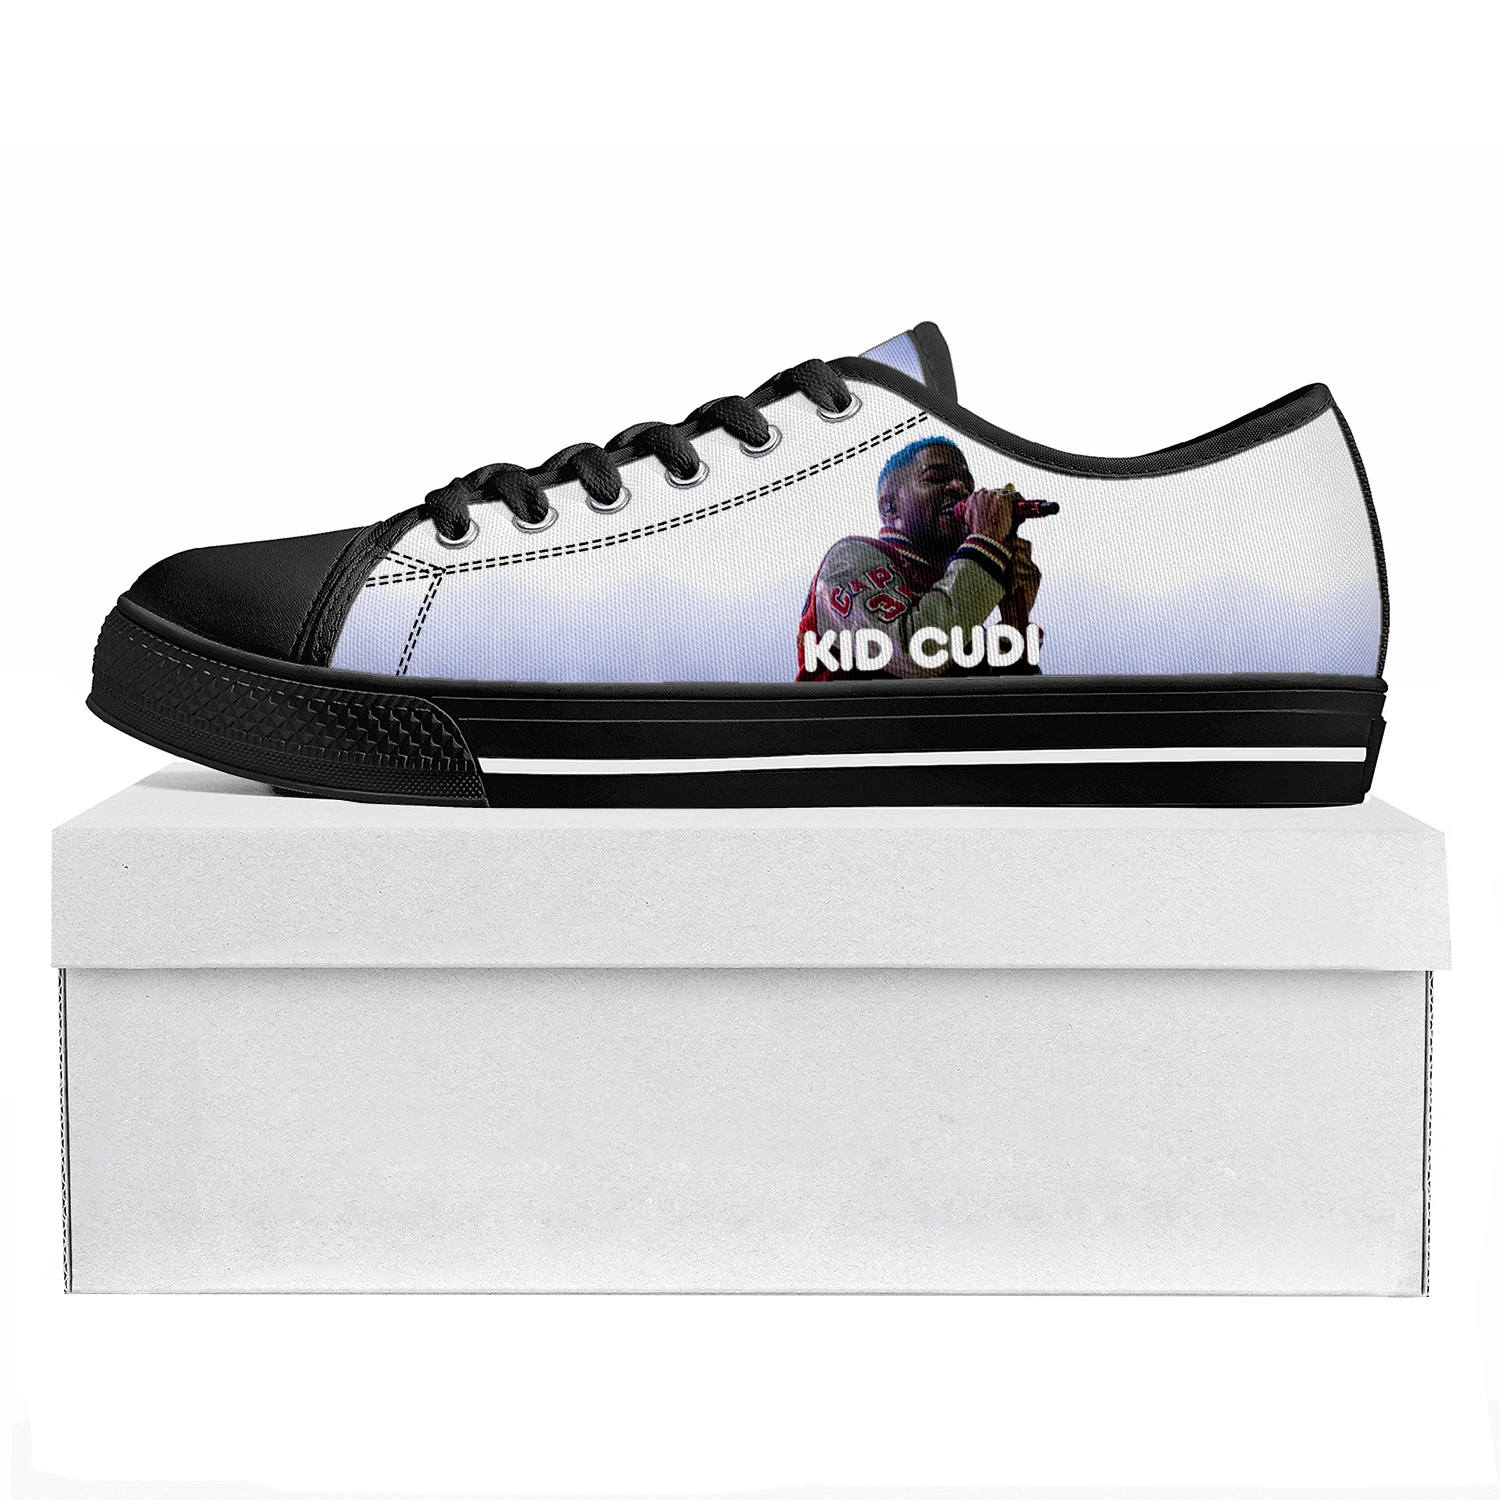 

Kid Rapper Cudi Fashion Low Top High Quality Sneakers Mens Womens Teenager Canvas Sneaker Casual Couple Shoes Custom Shoe Black